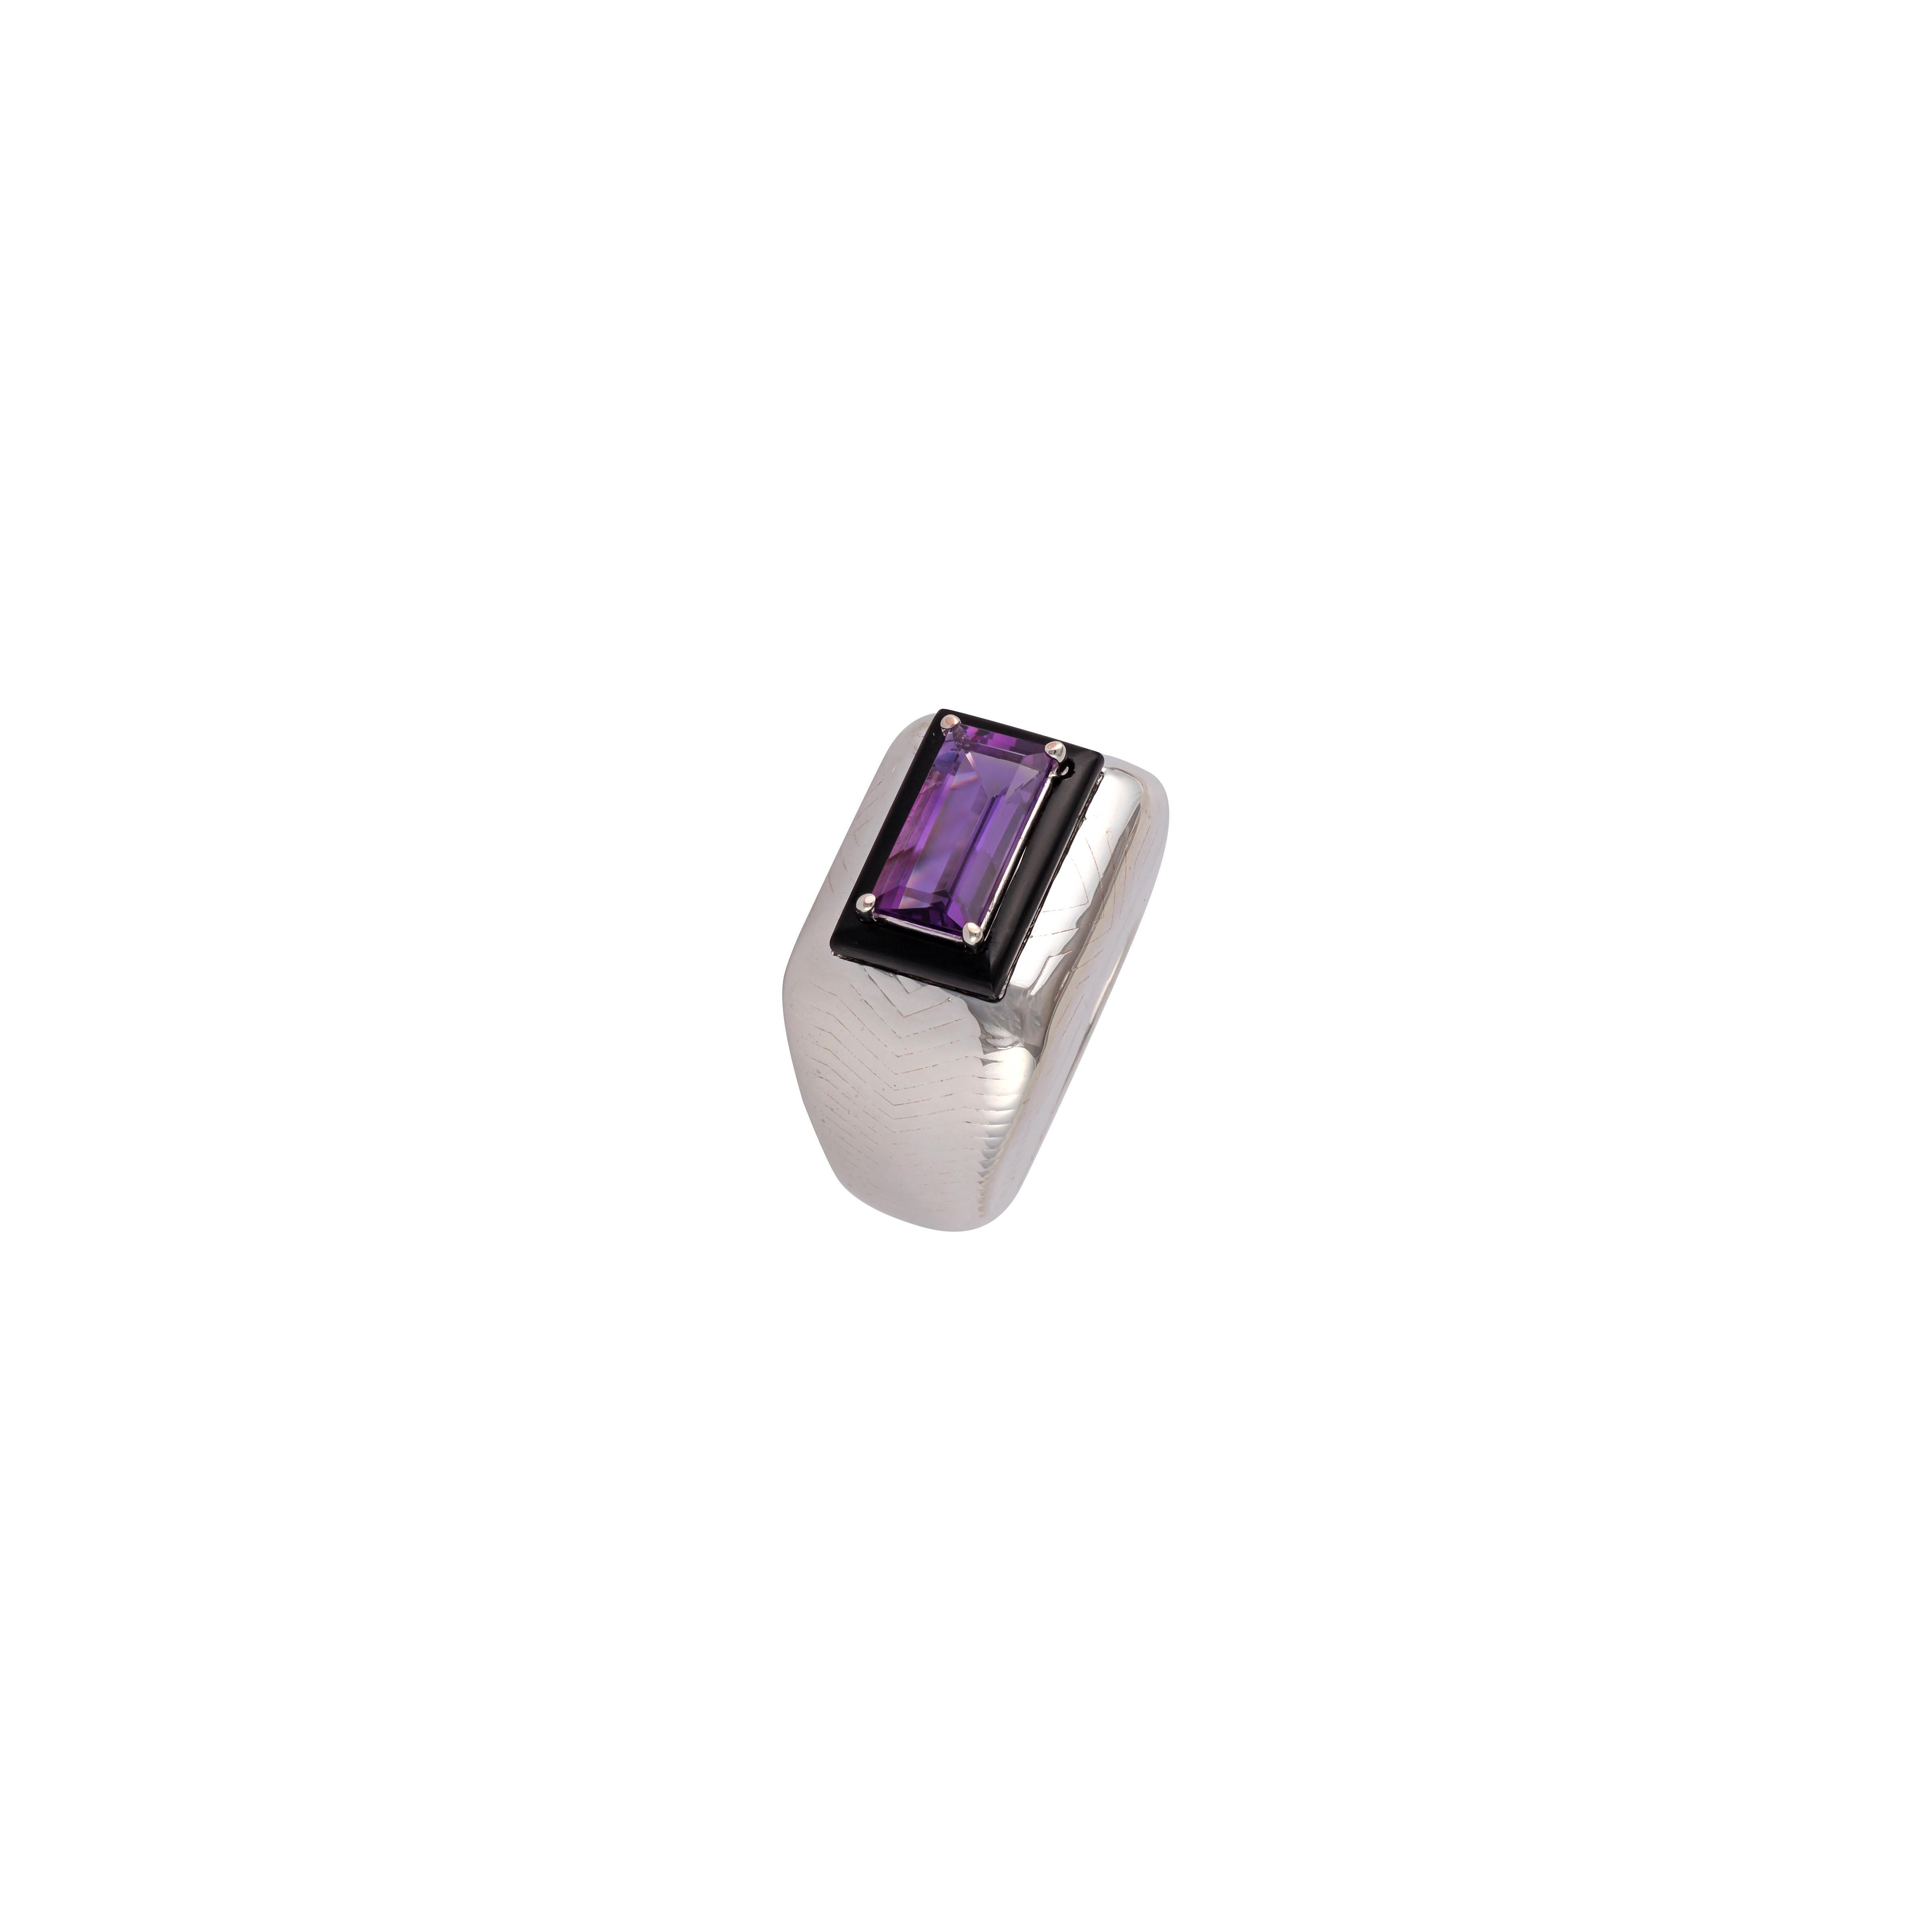 Aesthetic Movement Mens Big Boulder Silver Ring with Amethyst & Black Onyx Gem Stones in Sliver